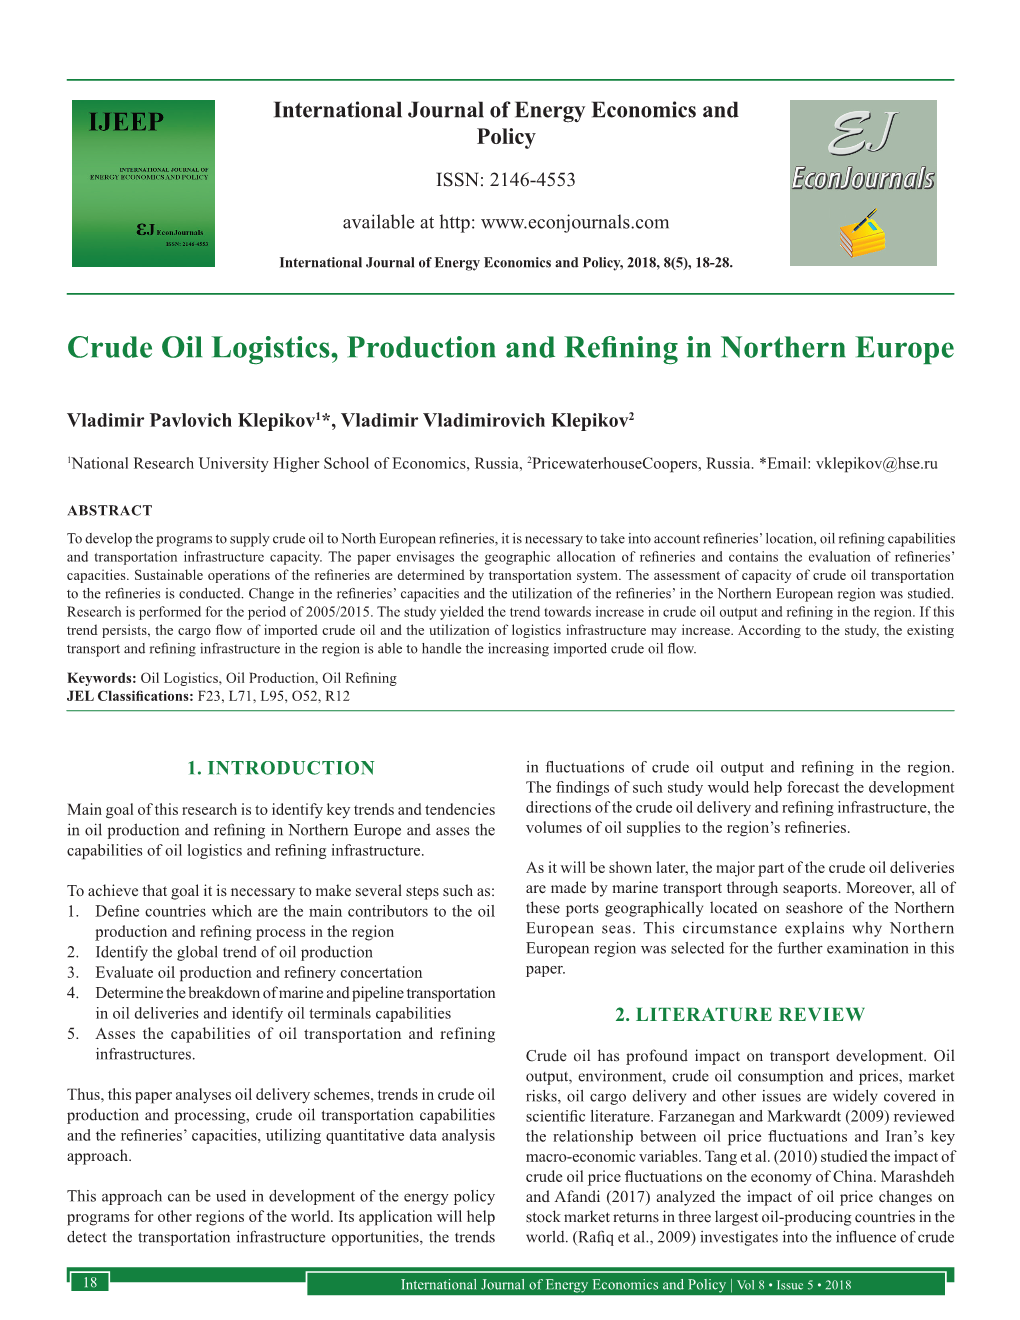 Crude Oil Logistics, Production and Refining in Northern Europe